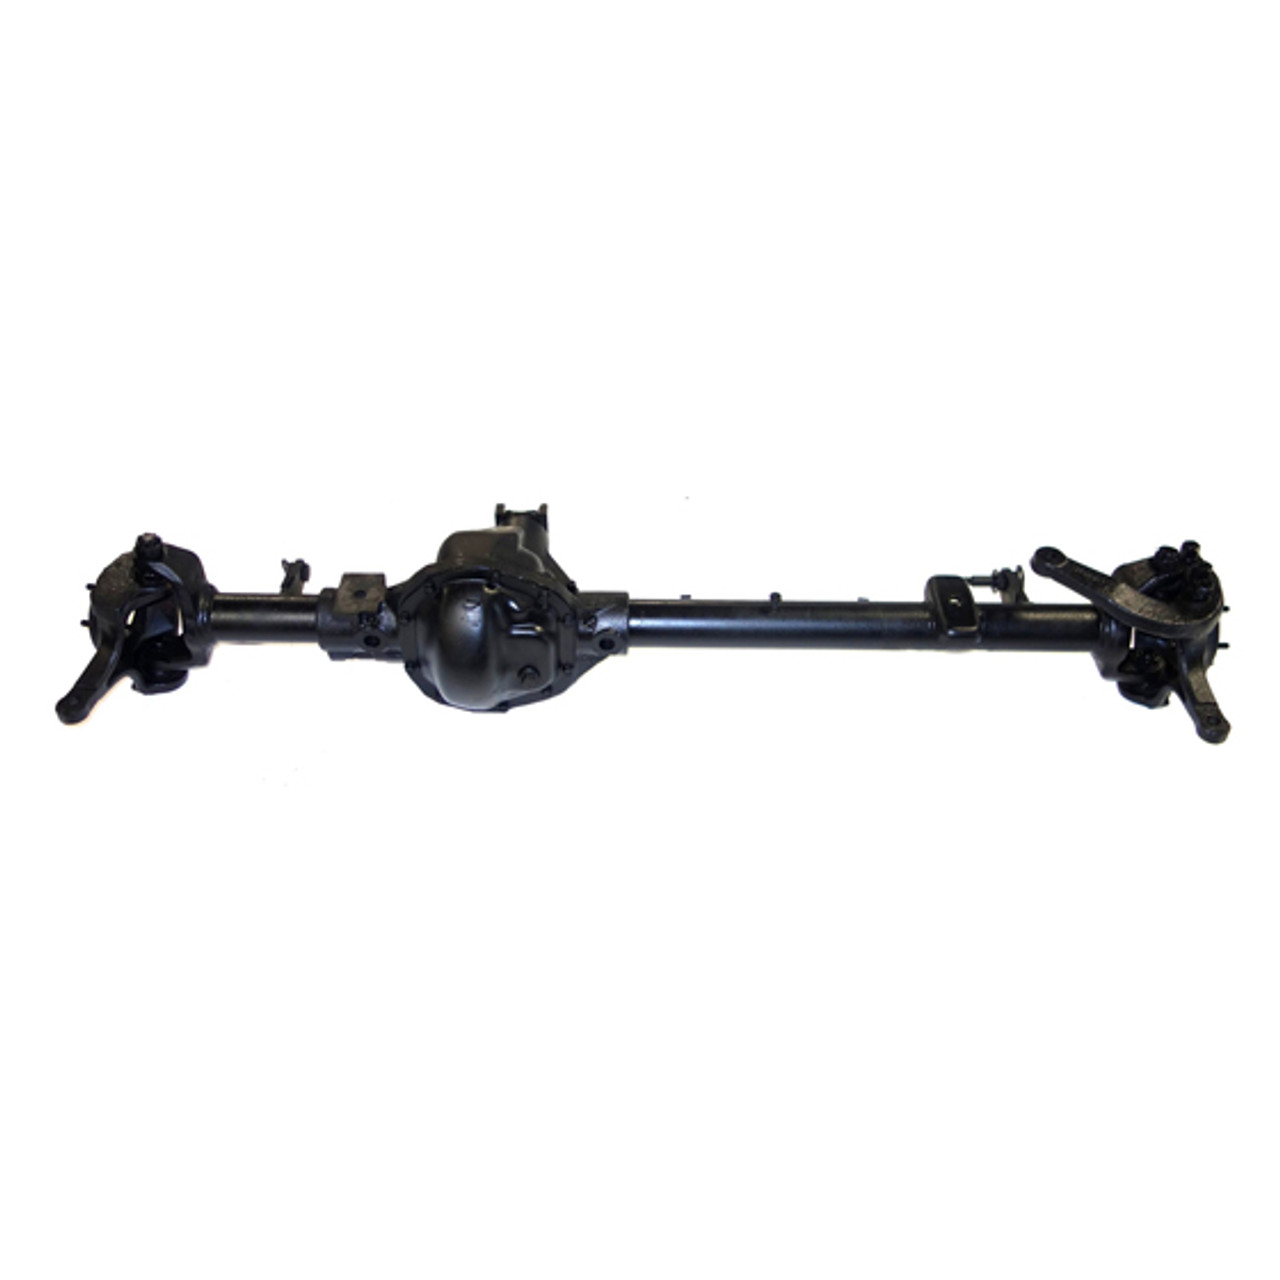 Reman Complete Axle Assembly for Dana 44 2000 Dodge Ram 1500 4.11 Ratio with 4 Wheel ABS